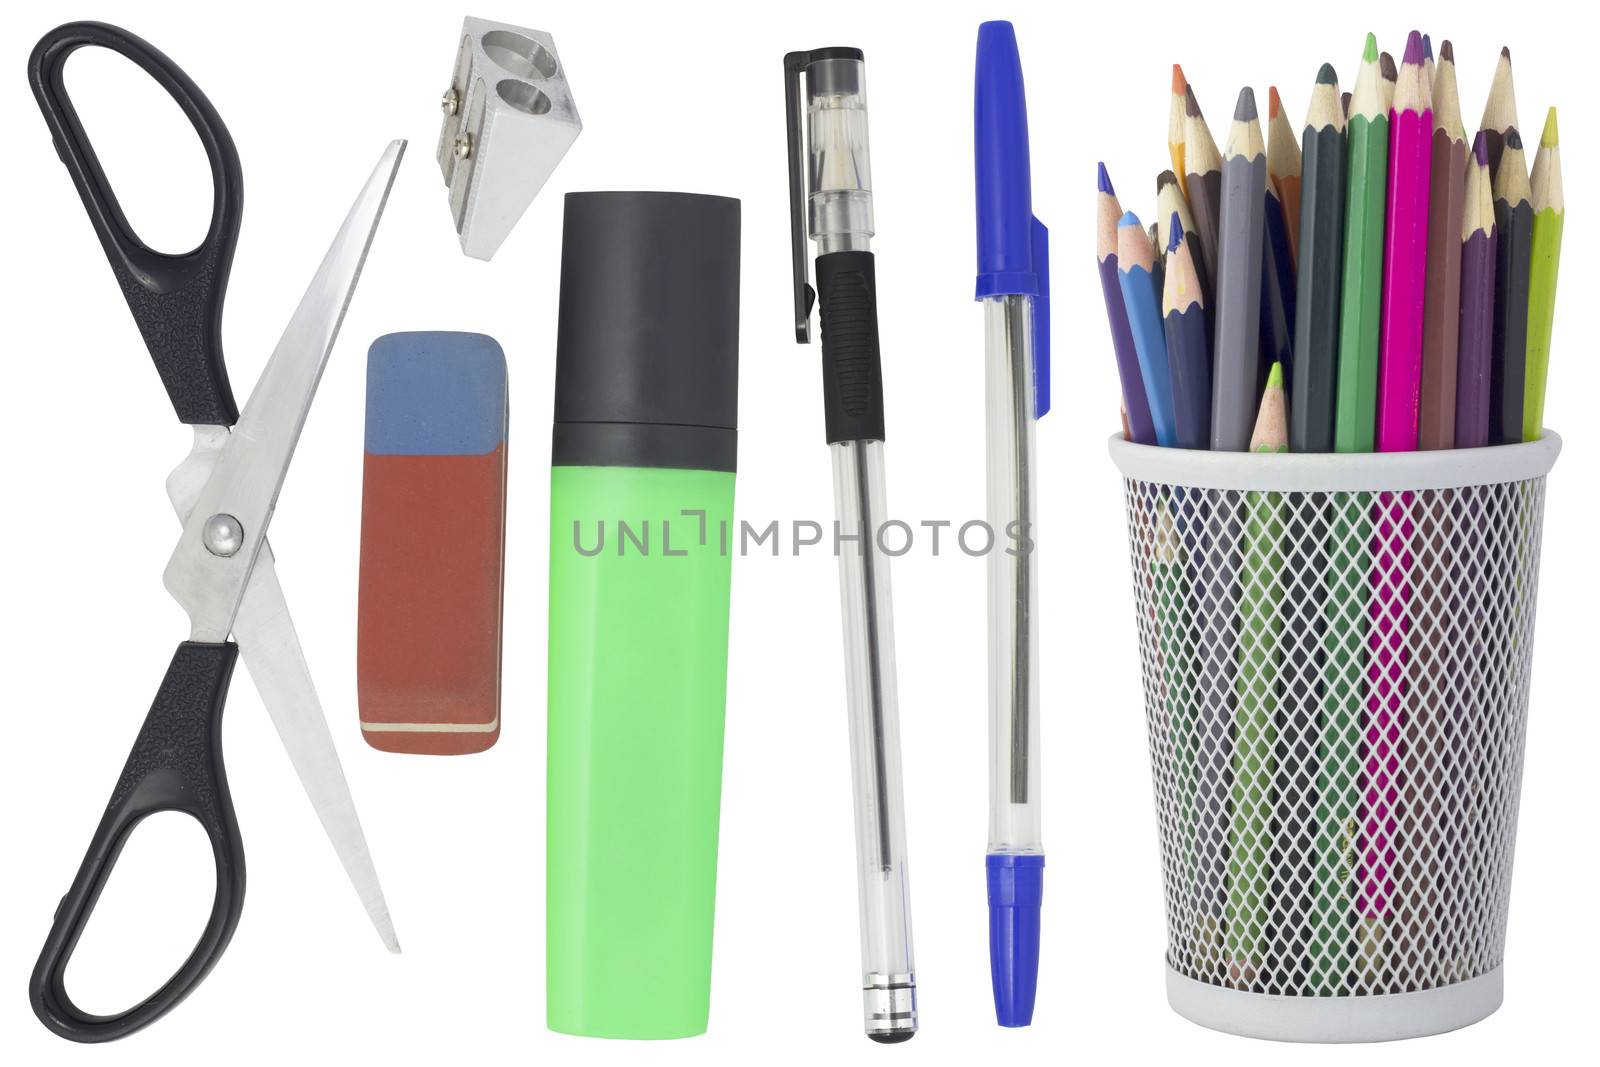 Office supplies: pencils, pens, scissors, markers, eraser and pencil sharpener. Isolated on white background